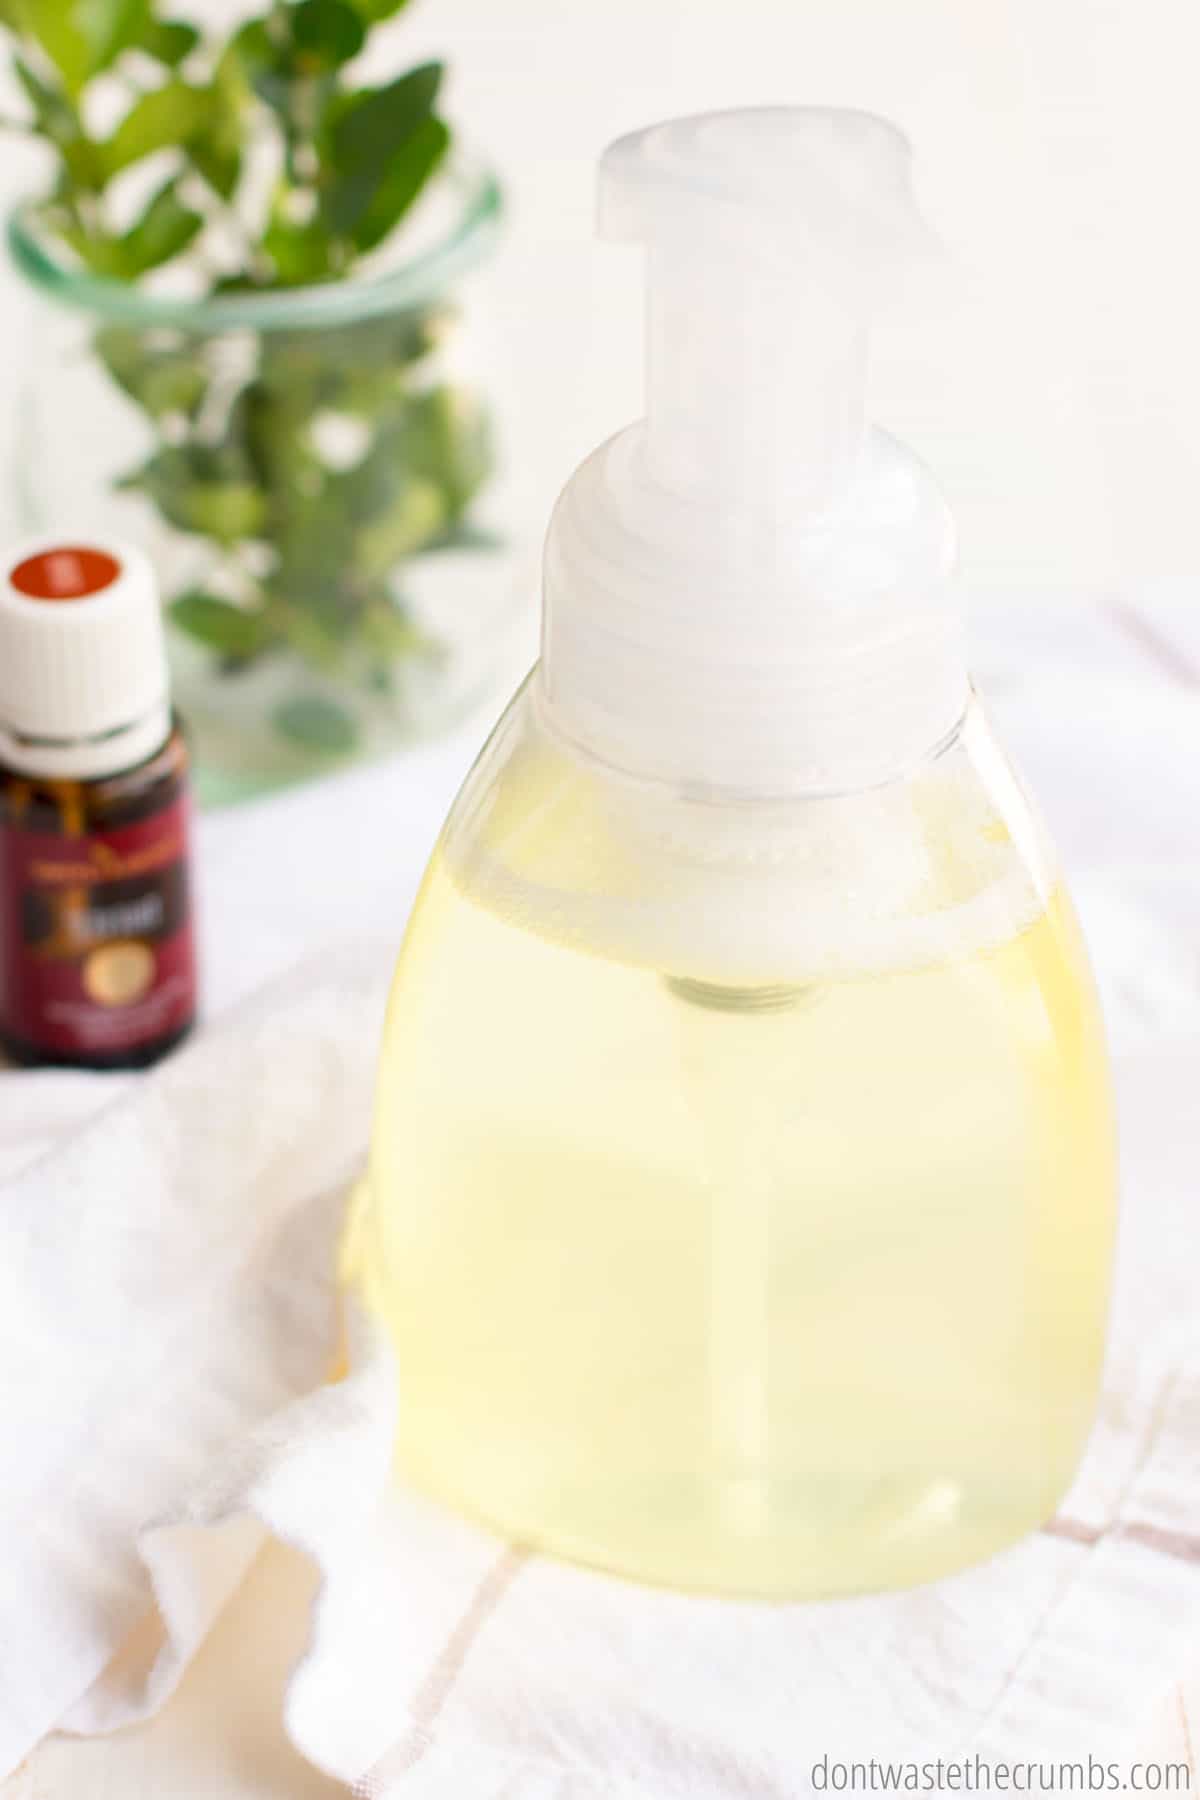 A clear foaming soap bottle filled with homemade Thieves foaming hand soap. A small bottle of Thieves essential oil is on the table beside it. There is a green plant behind the bottle of essential oil.